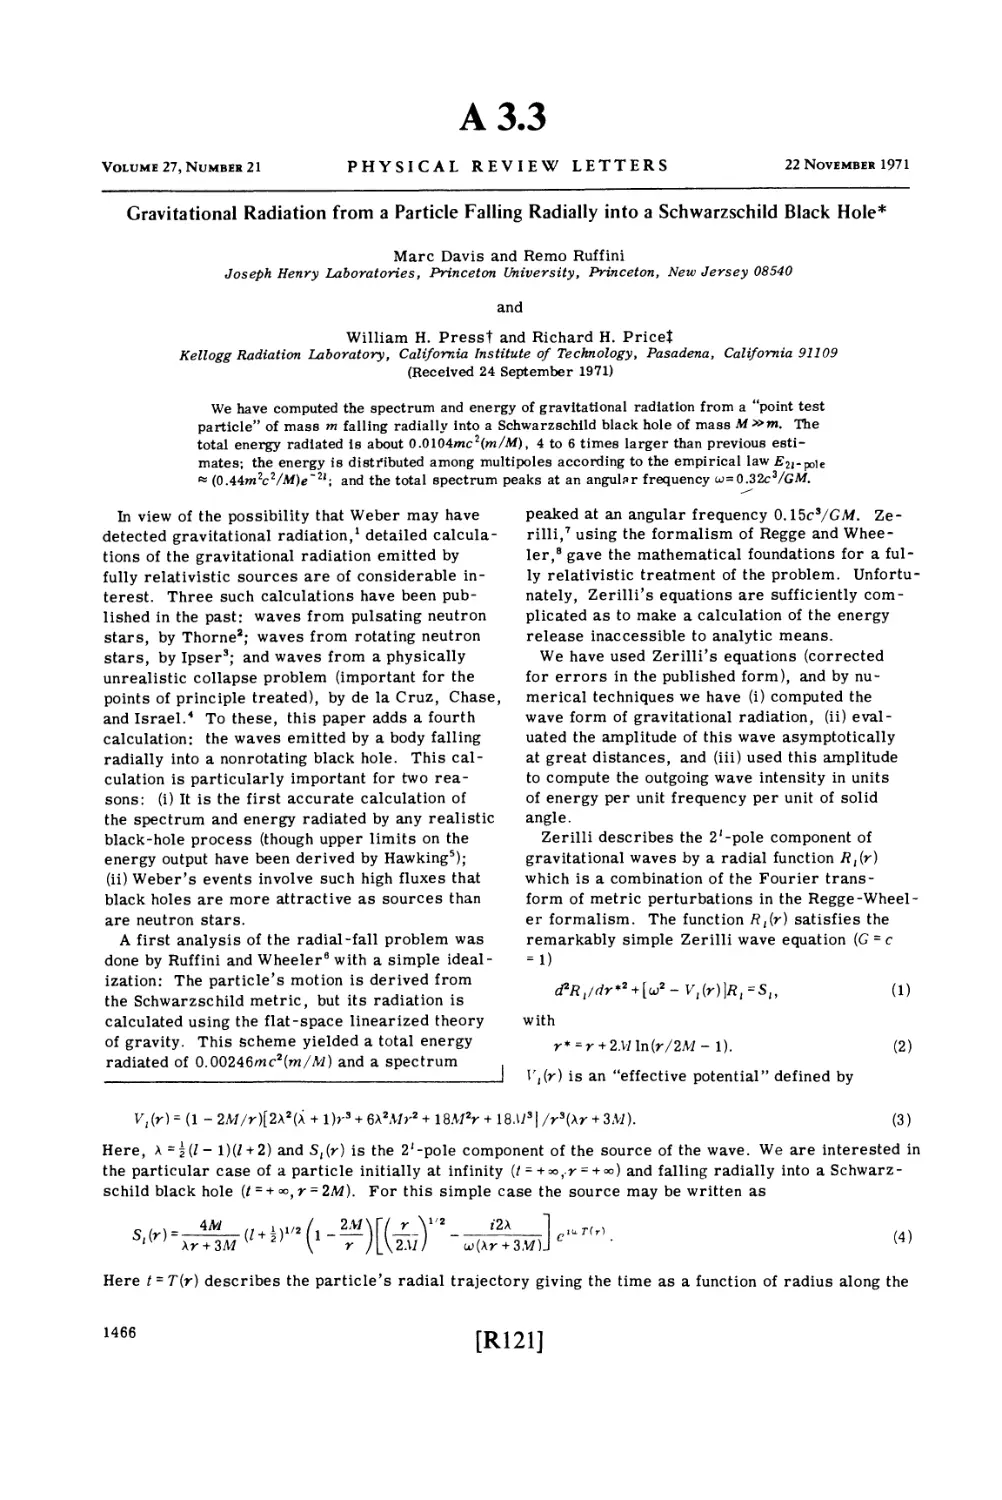 Appendix 3.3 Gravitational Radiation from a Particle Falling Radially into a Schwarzschild Black Hole / M. Davis, R. Ruffini, W. Press and R. H. Price